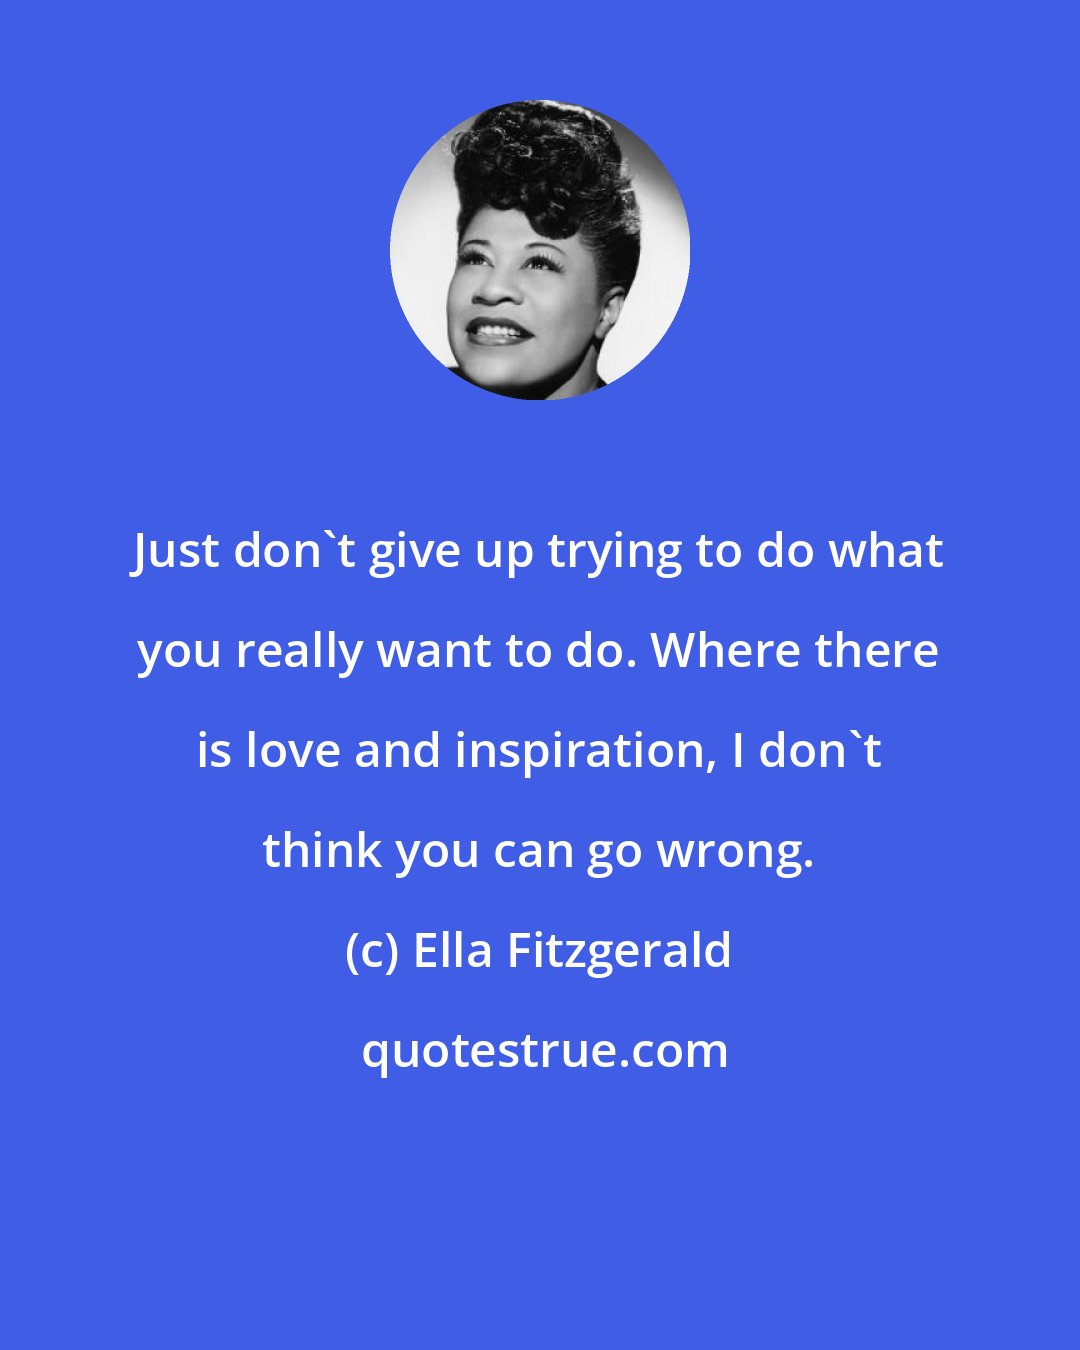 Ella Fitzgerald: Just don't give up trying to do what you really want to do. Where there is love and inspiration, I don't think you can go wrong.